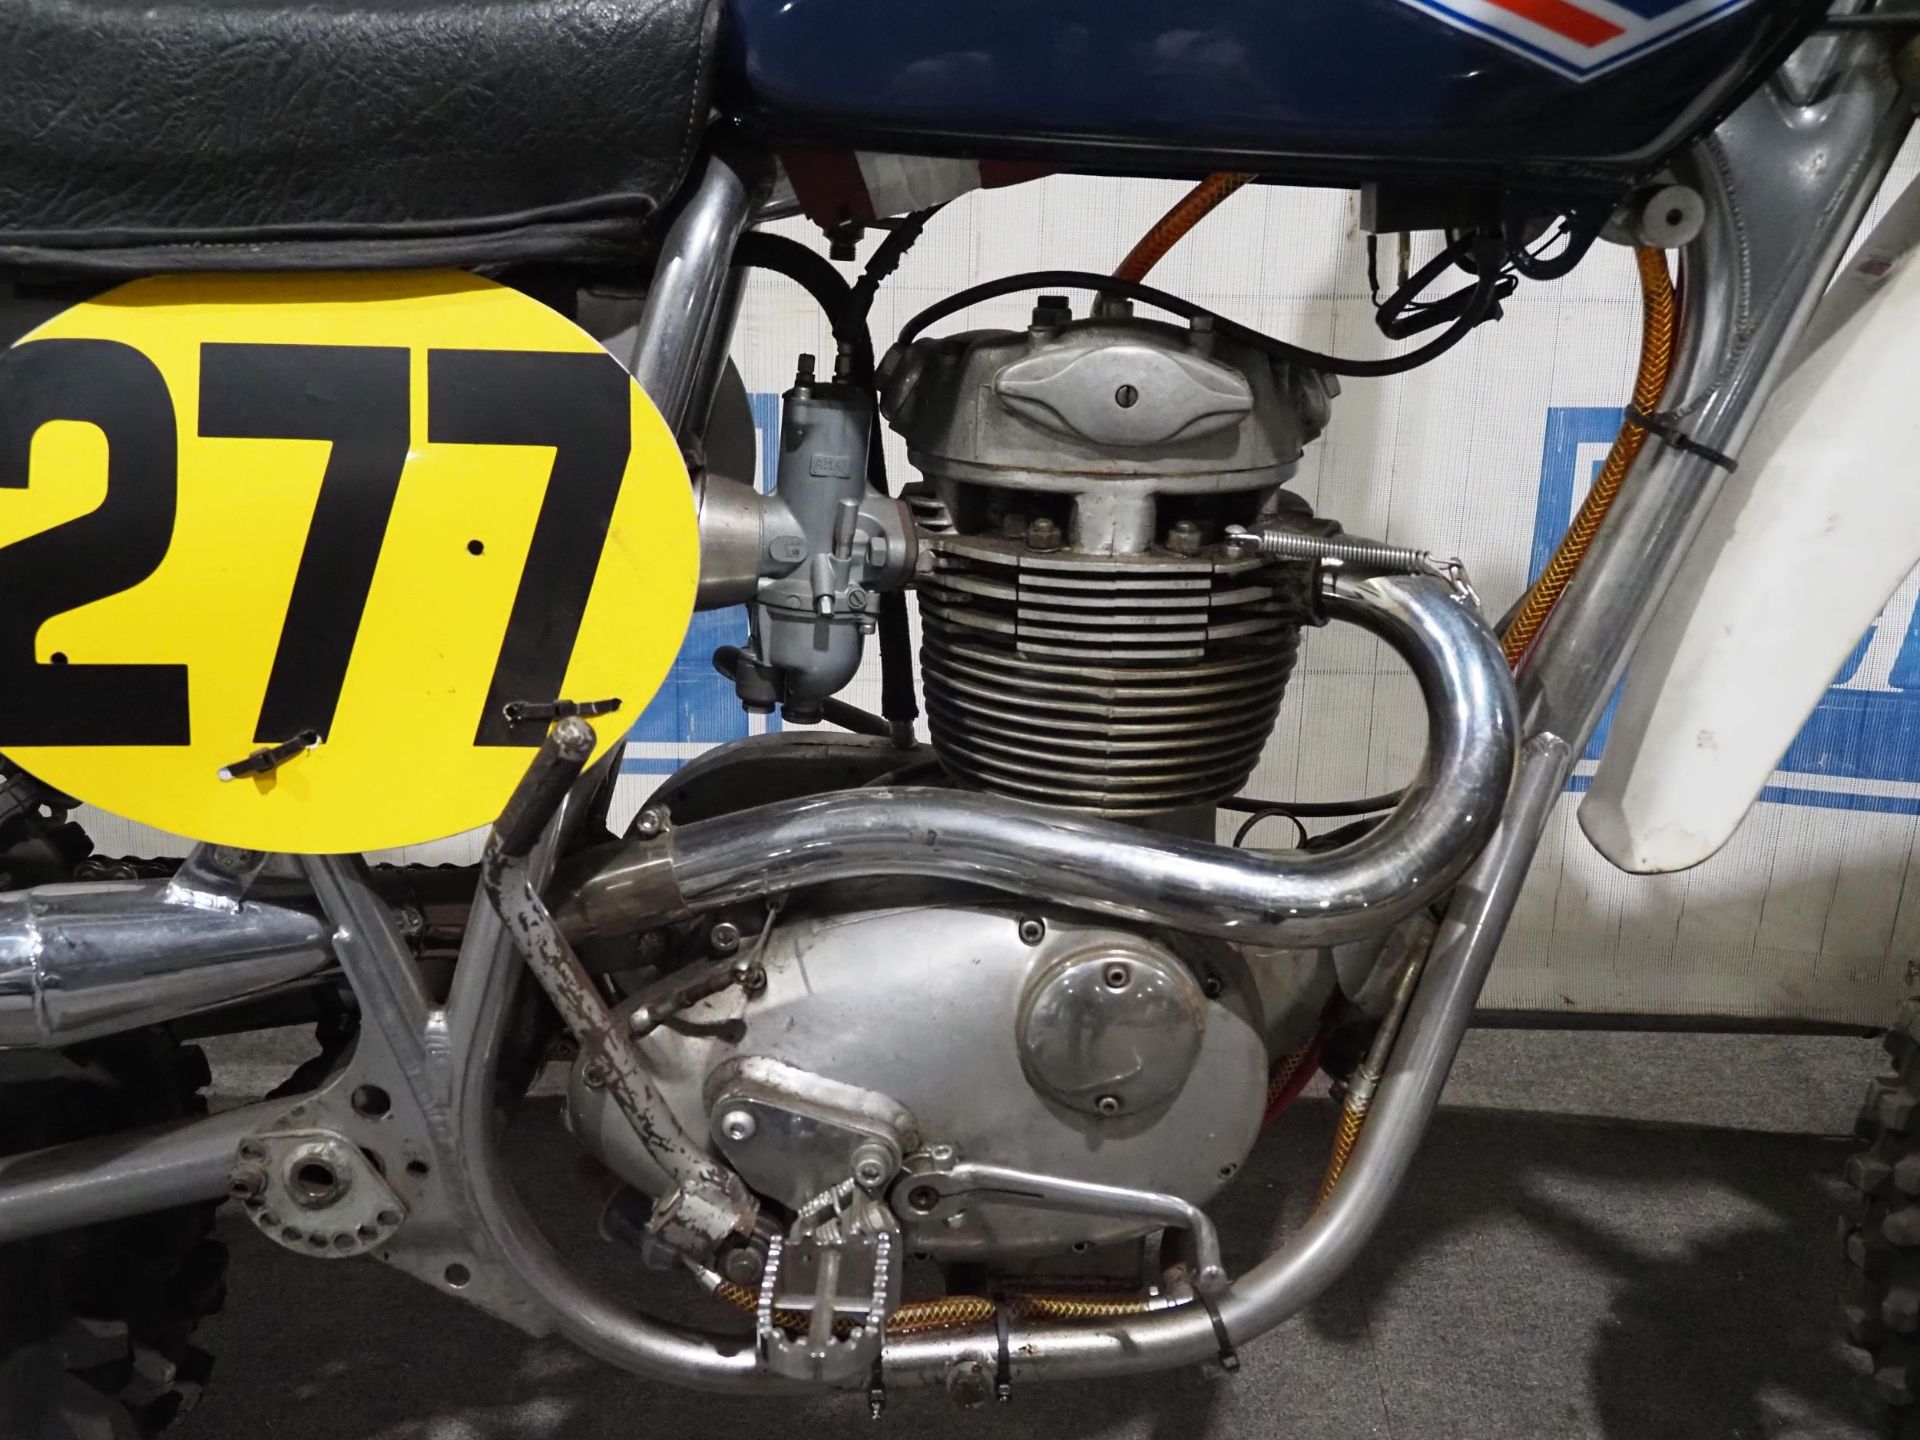 CCM dirt motorcycle. 1979. 410cc short stroke engine. Engine No. CB32905. Part of the Alec Dorrell - Image 3 of 12